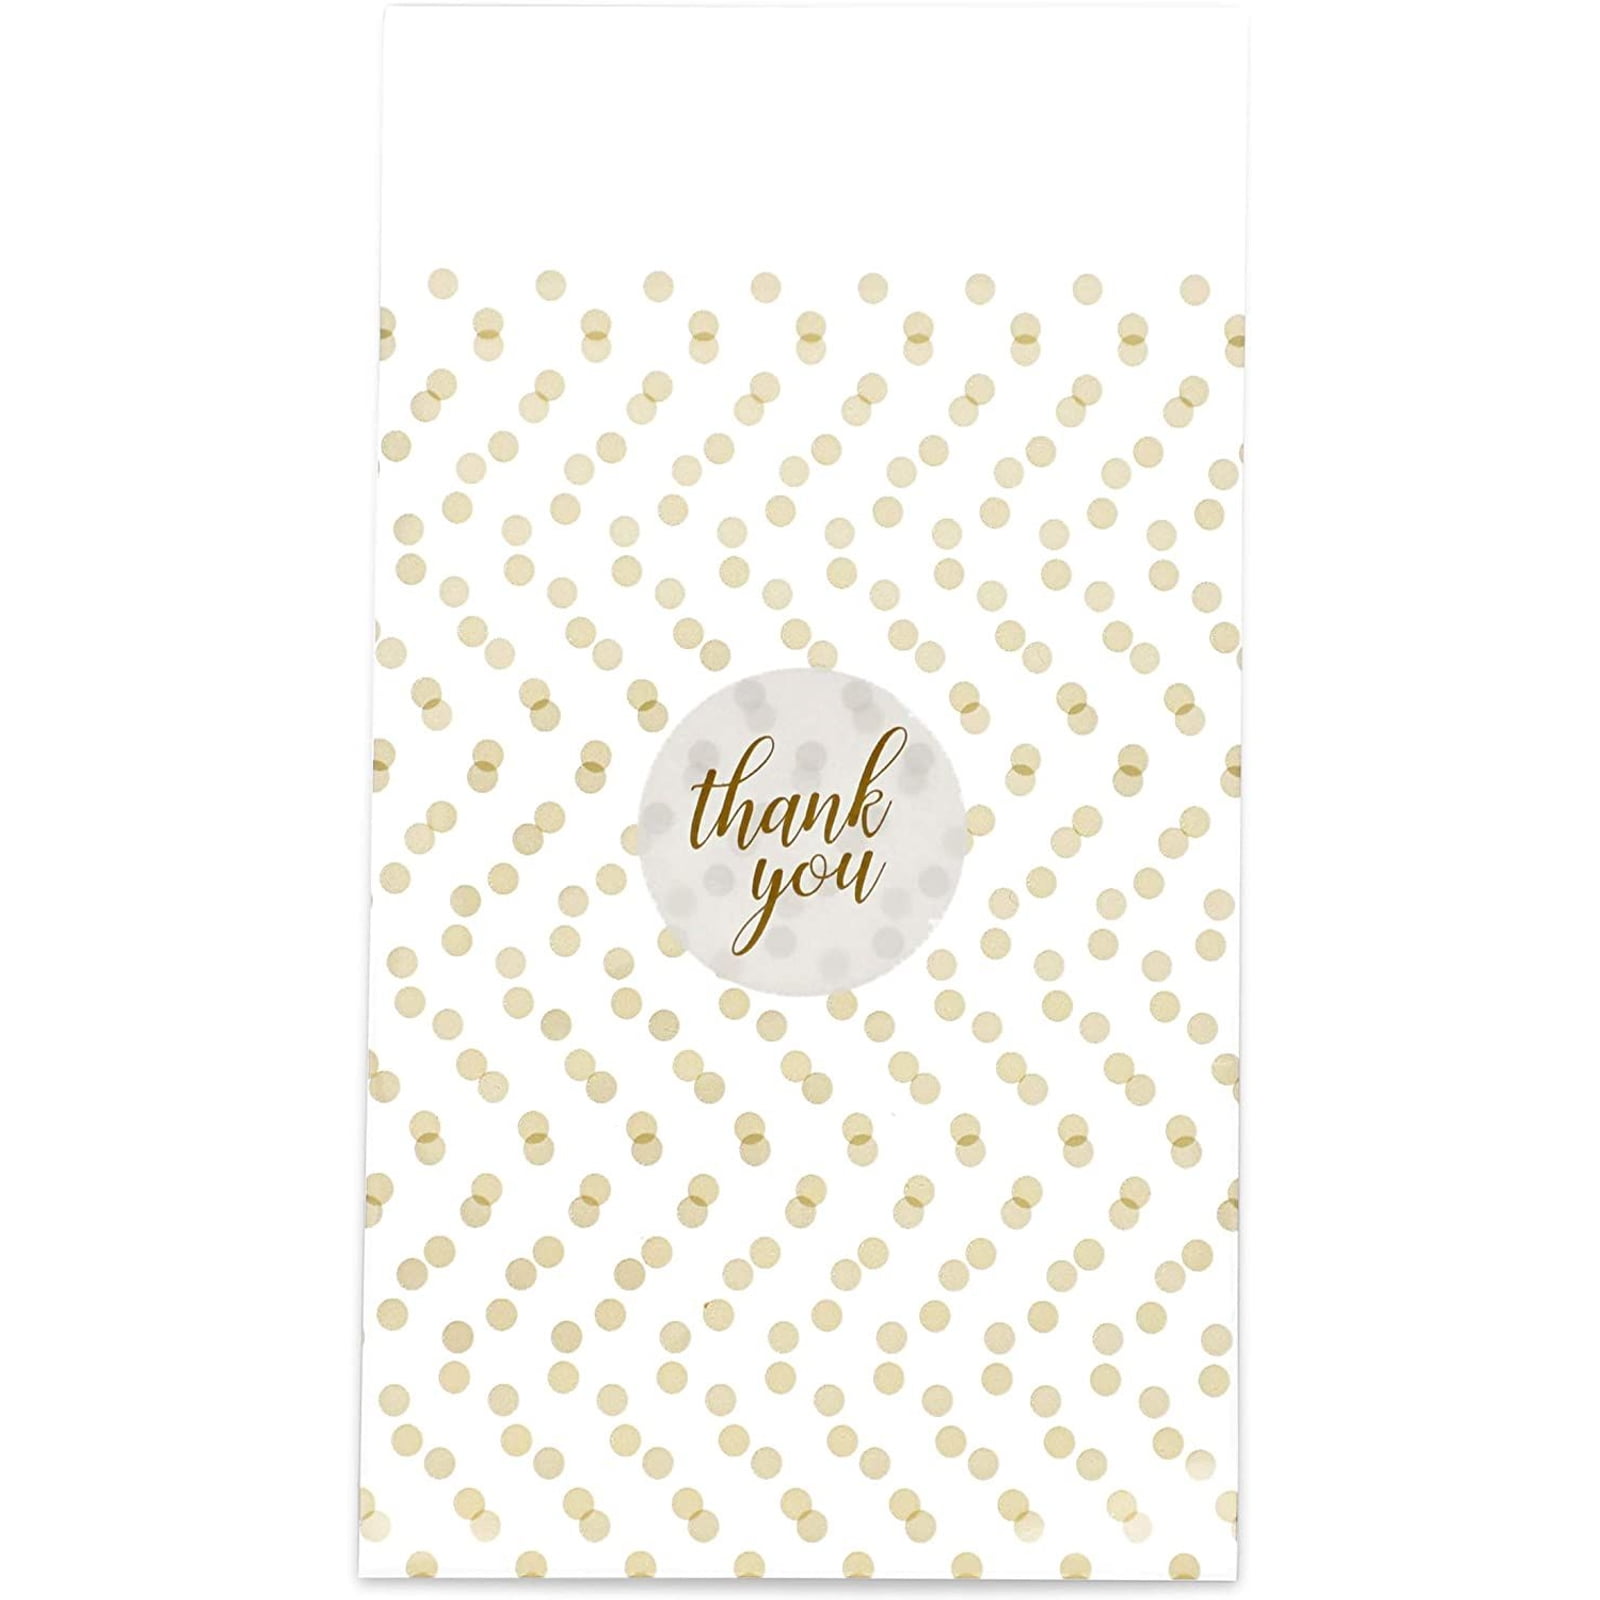 100x Self Adhesive Cookie Bags Thank You Design Lovely Bulk Favor Gift 6L 